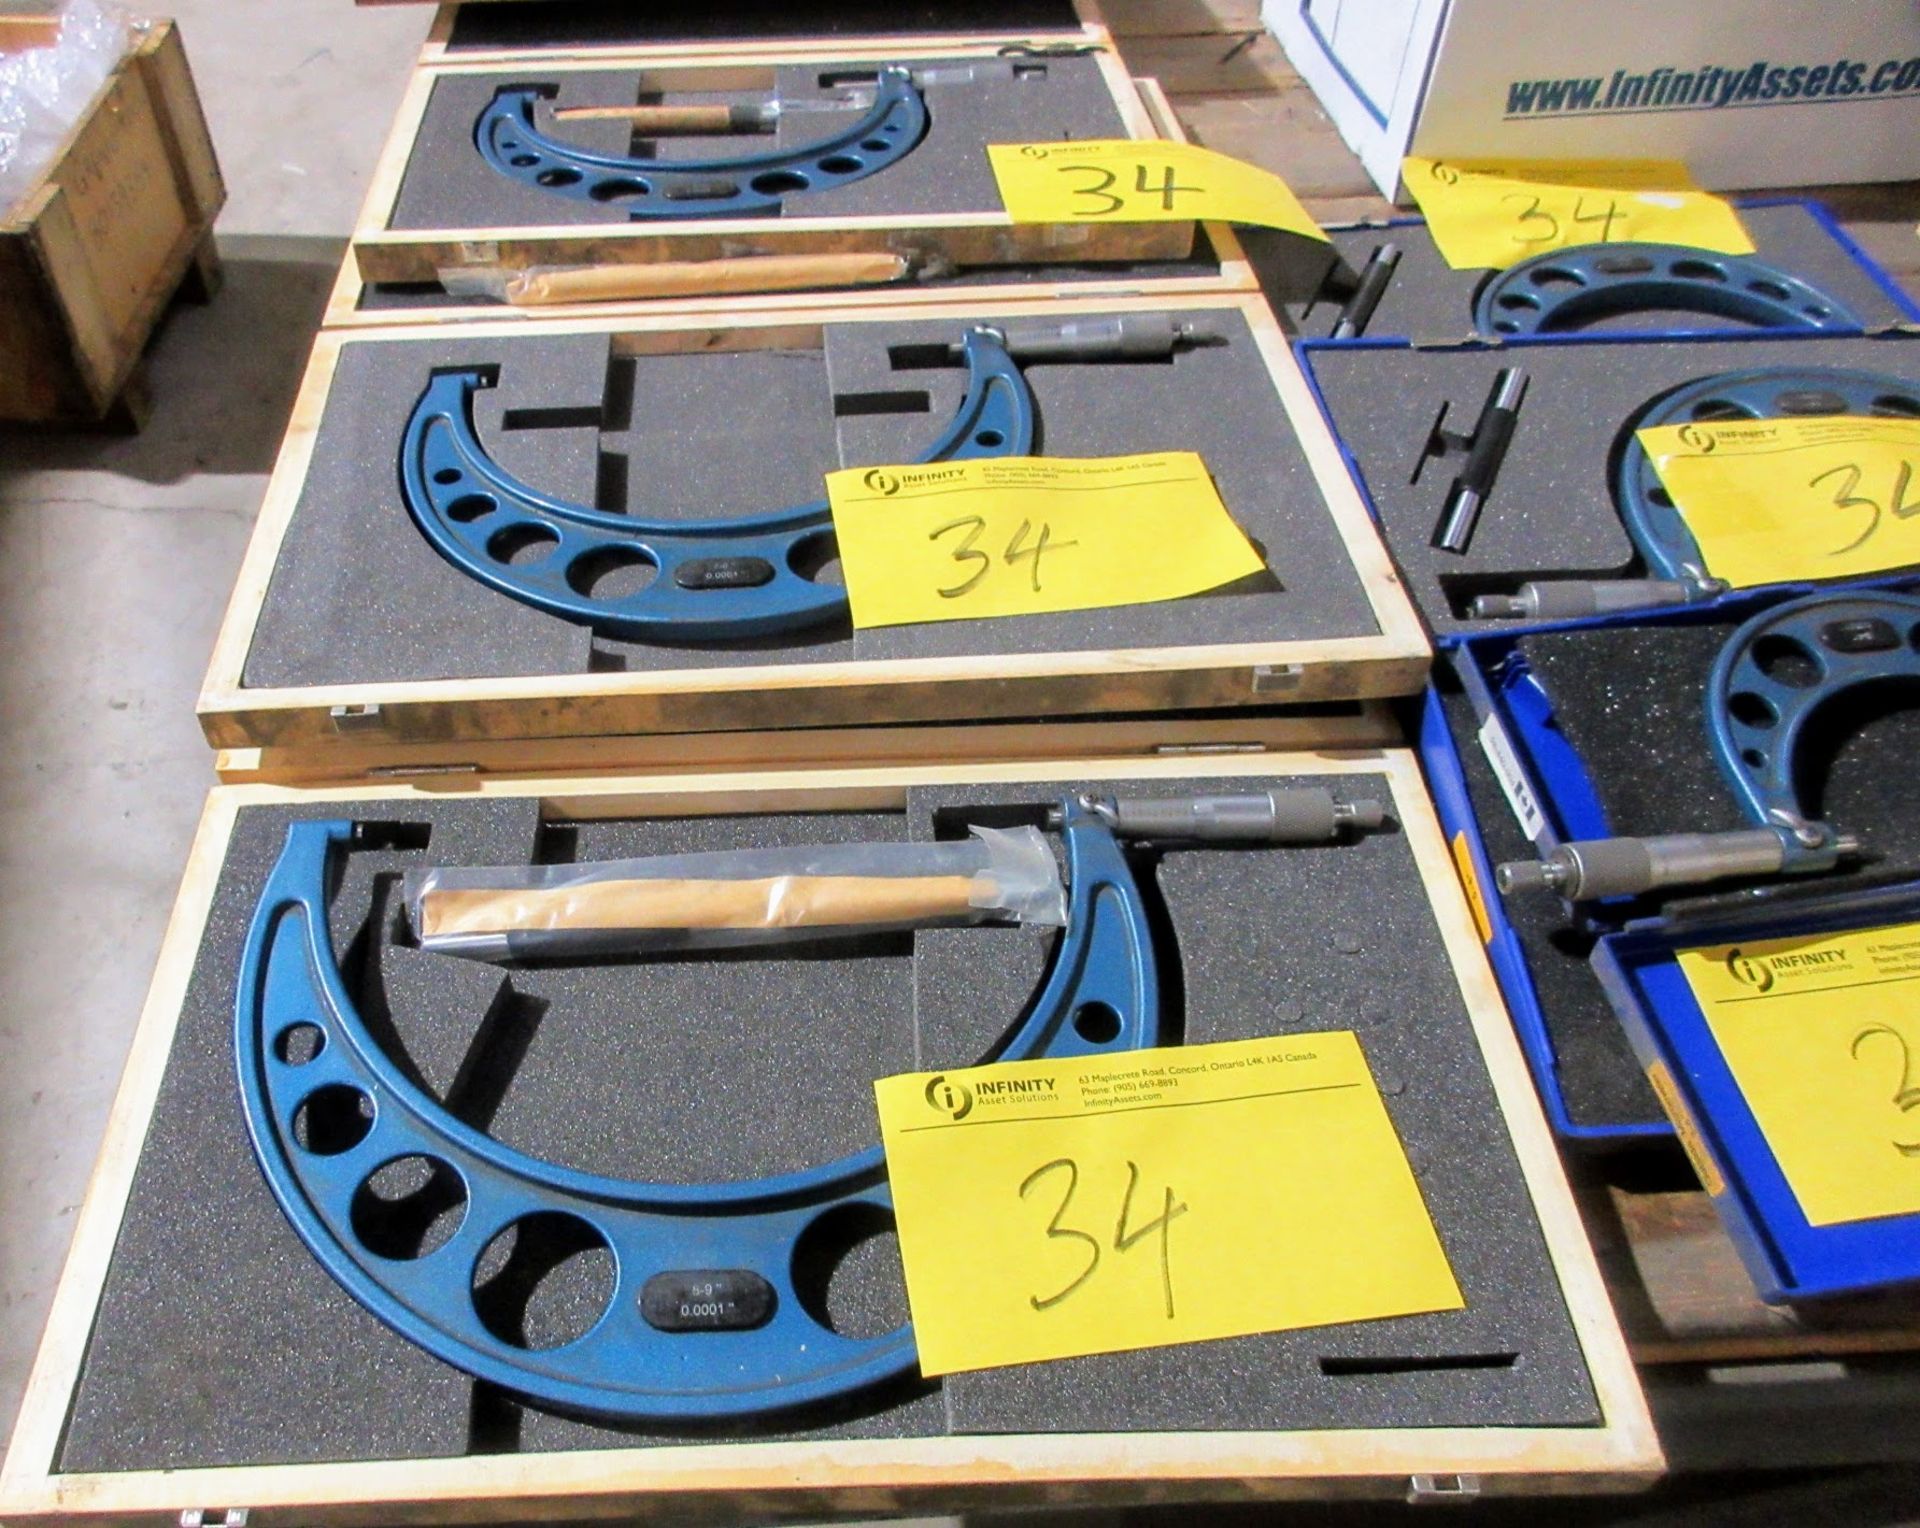 LOT OF (7) FOWLER MICROMETERS IN CASES (9-10", 8-9", 7-8", 6-7", 5-6", 4-5", 3-4") - Image 3 of 4